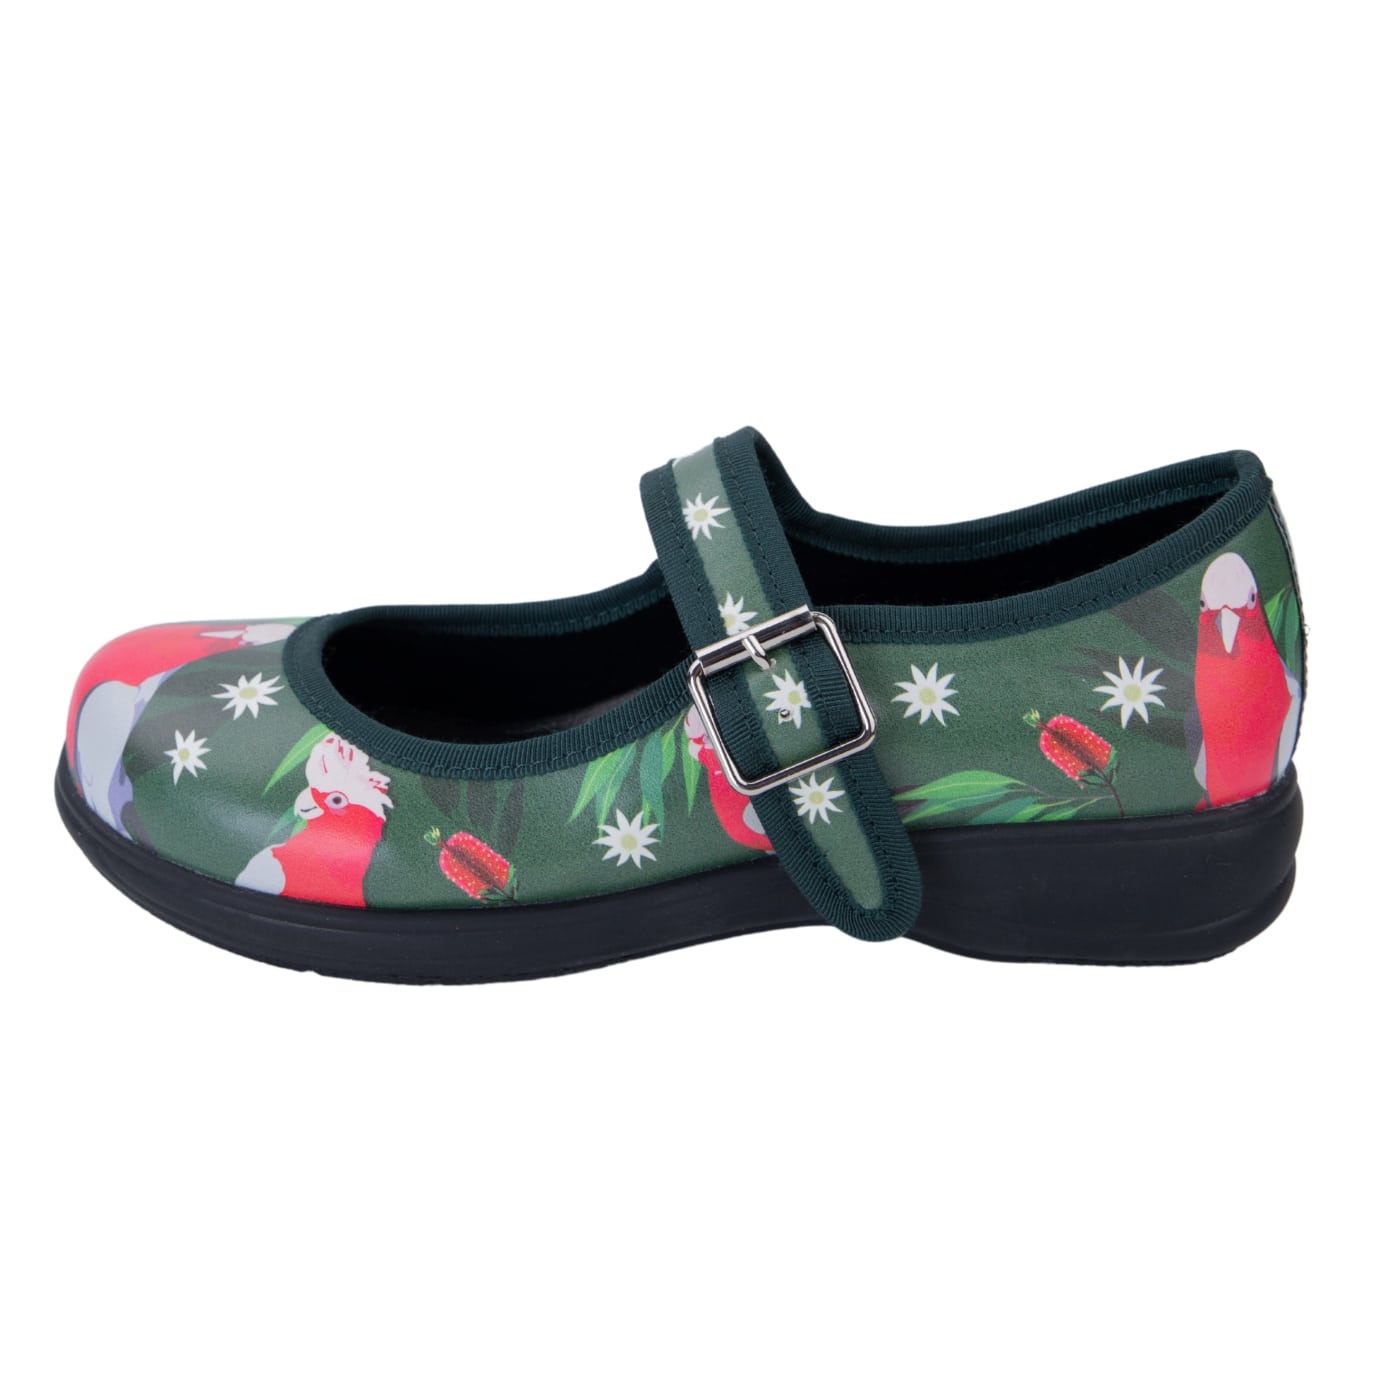 Polly Mary Janes by RainbowsAndFairies.com.au (Cockatoo - Galah - Mismatched Shoes - Cute & Comfy - Buckle Up Shoes - Native Flowers - Australian) - SKU: FW_MARYJ_POLLY_ORG - Pic-03